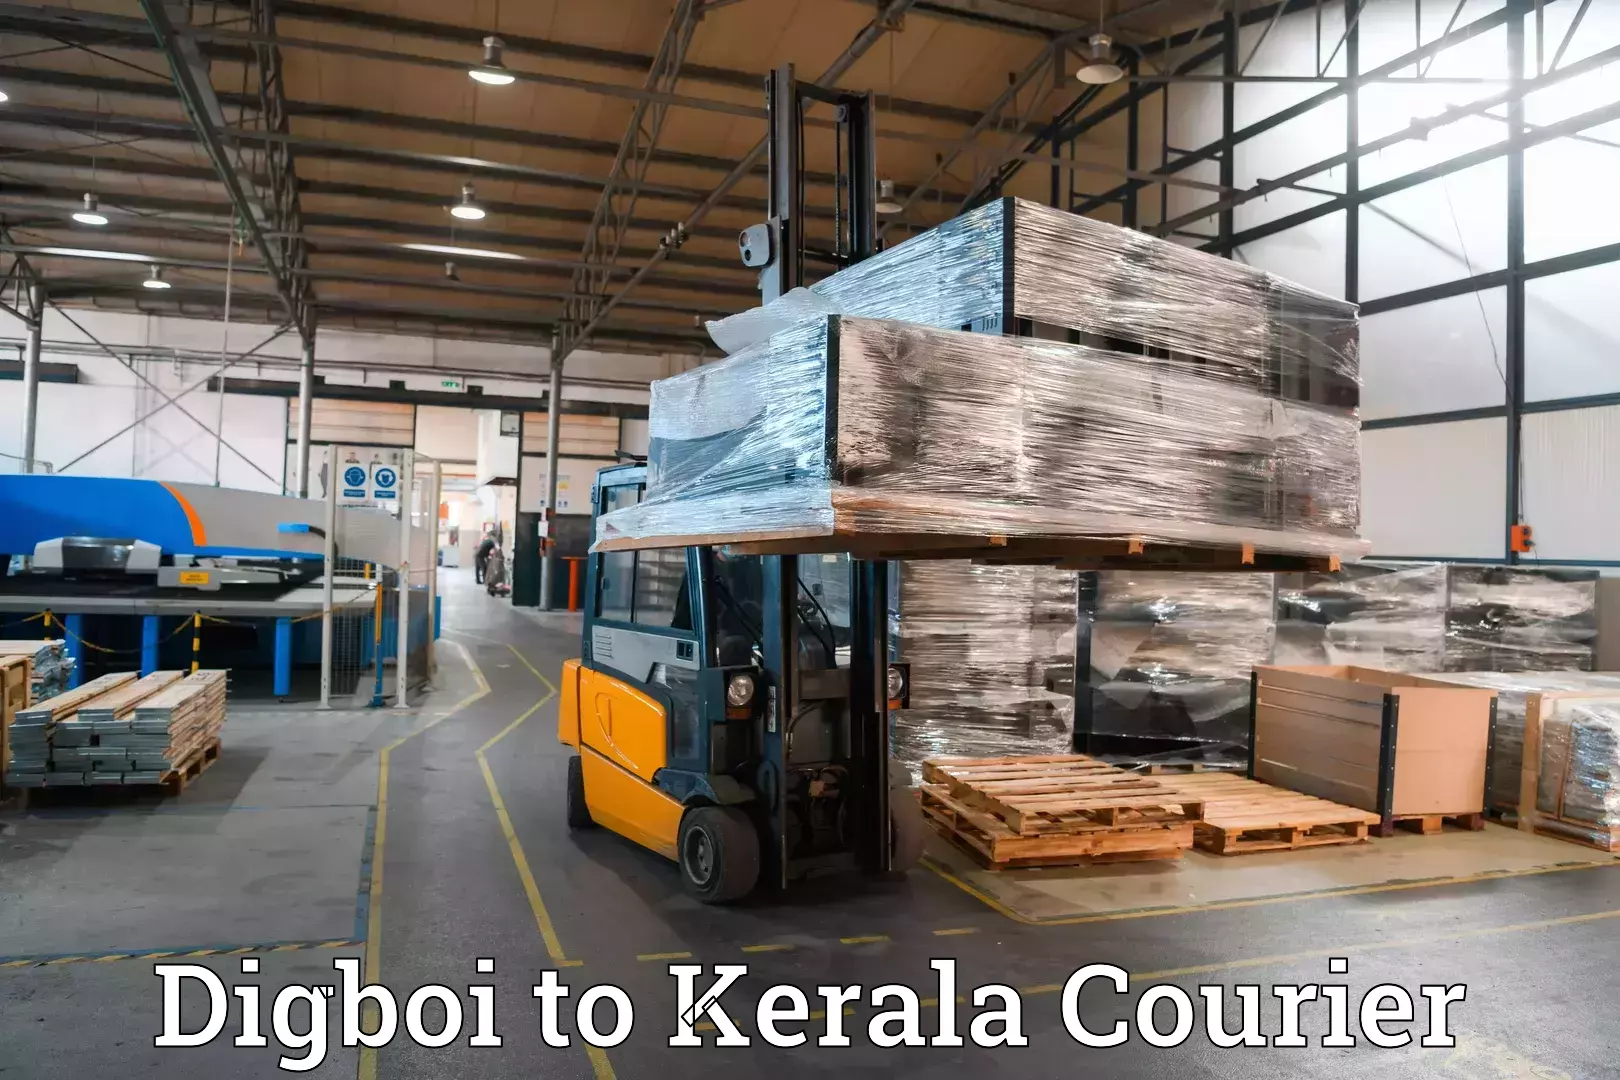 Baggage delivery technology Digboi to Cochin